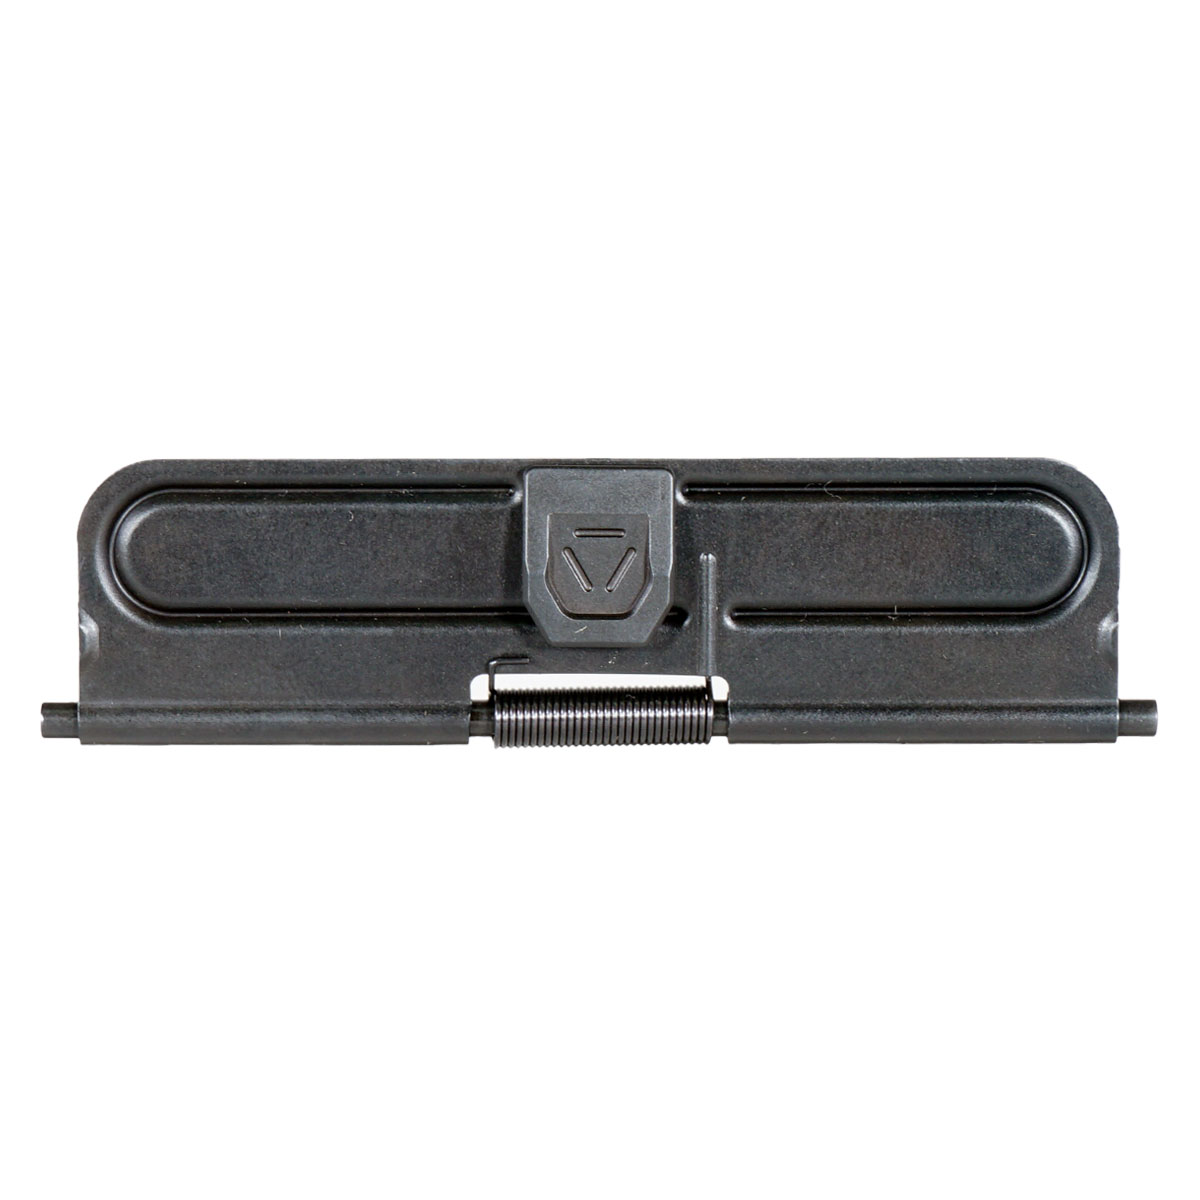 Strike Industries Stamped Steel Dust Cover for AR-15 Easy Tool-Free Installation